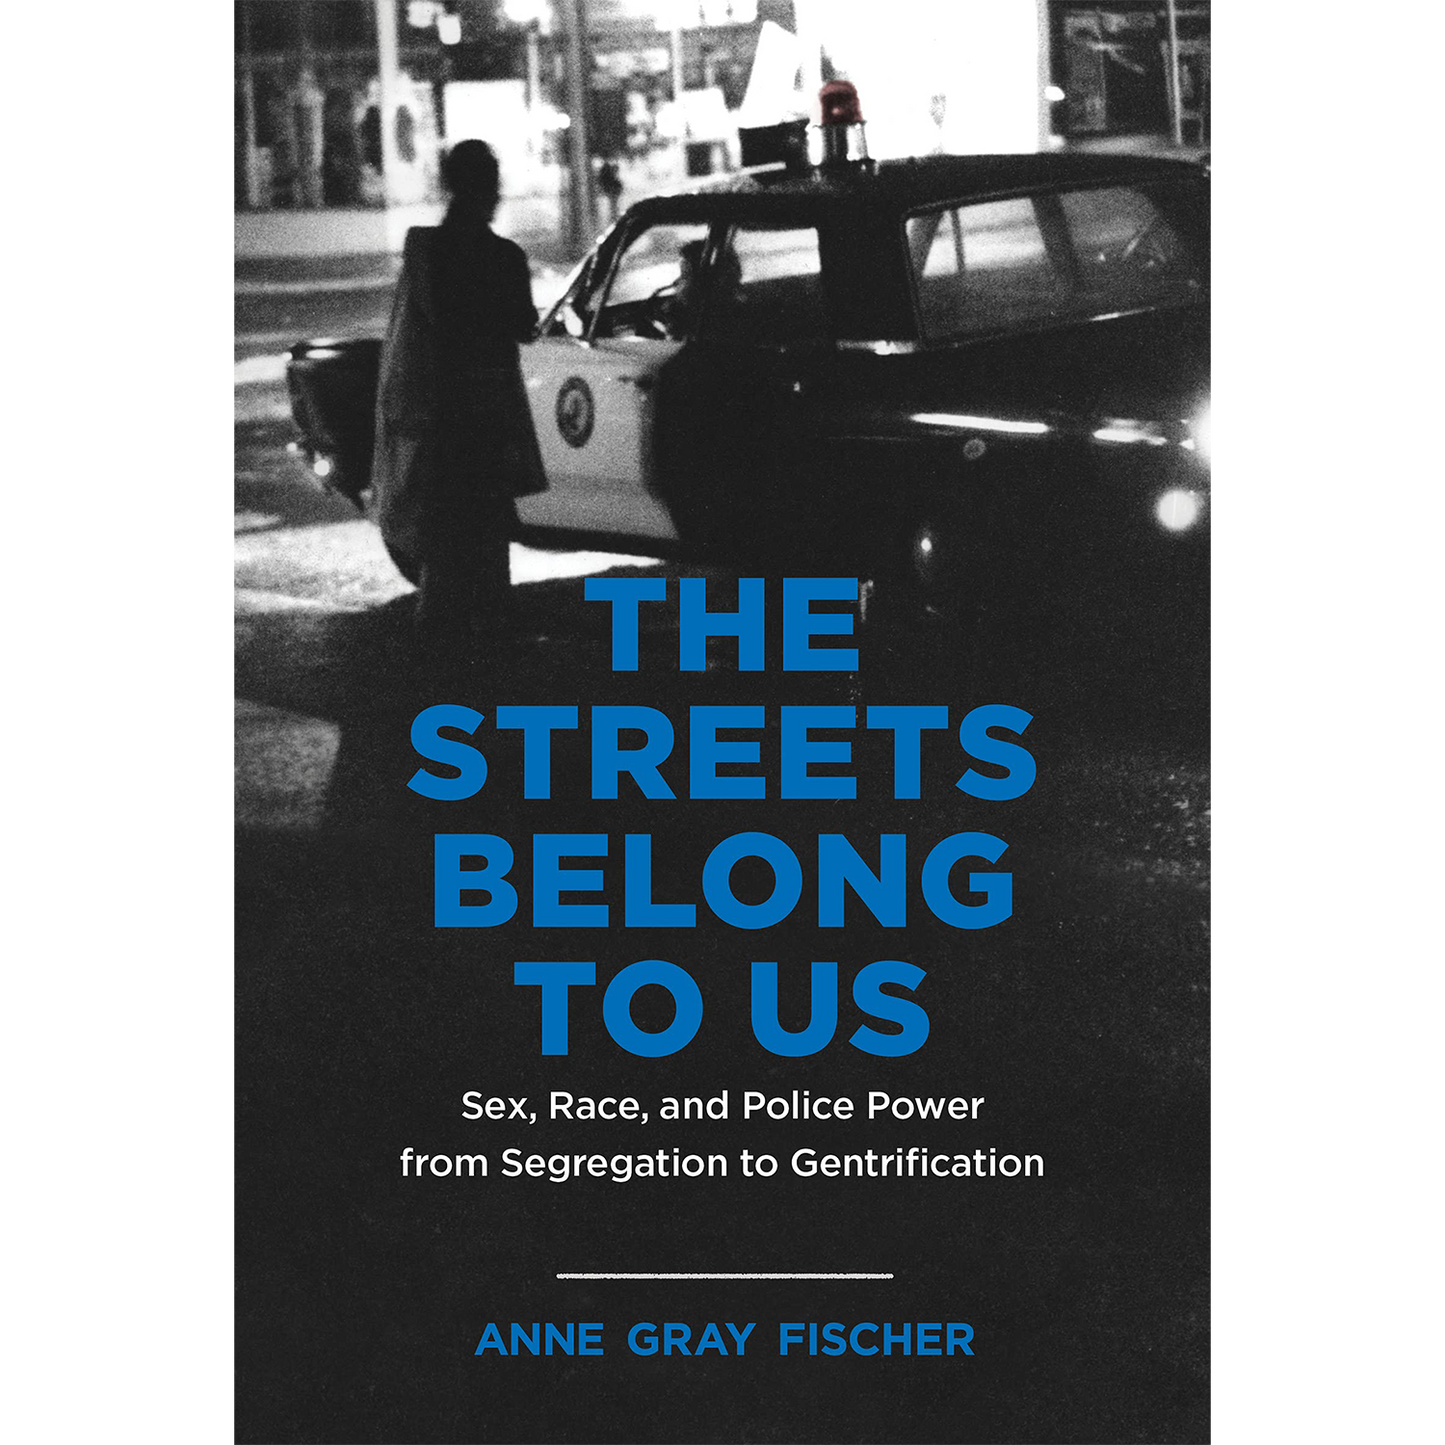 The Streets Belong to Us: Sex, Race, and Police Power from Segregation to Gentrification (Justice, Power, and Politics)